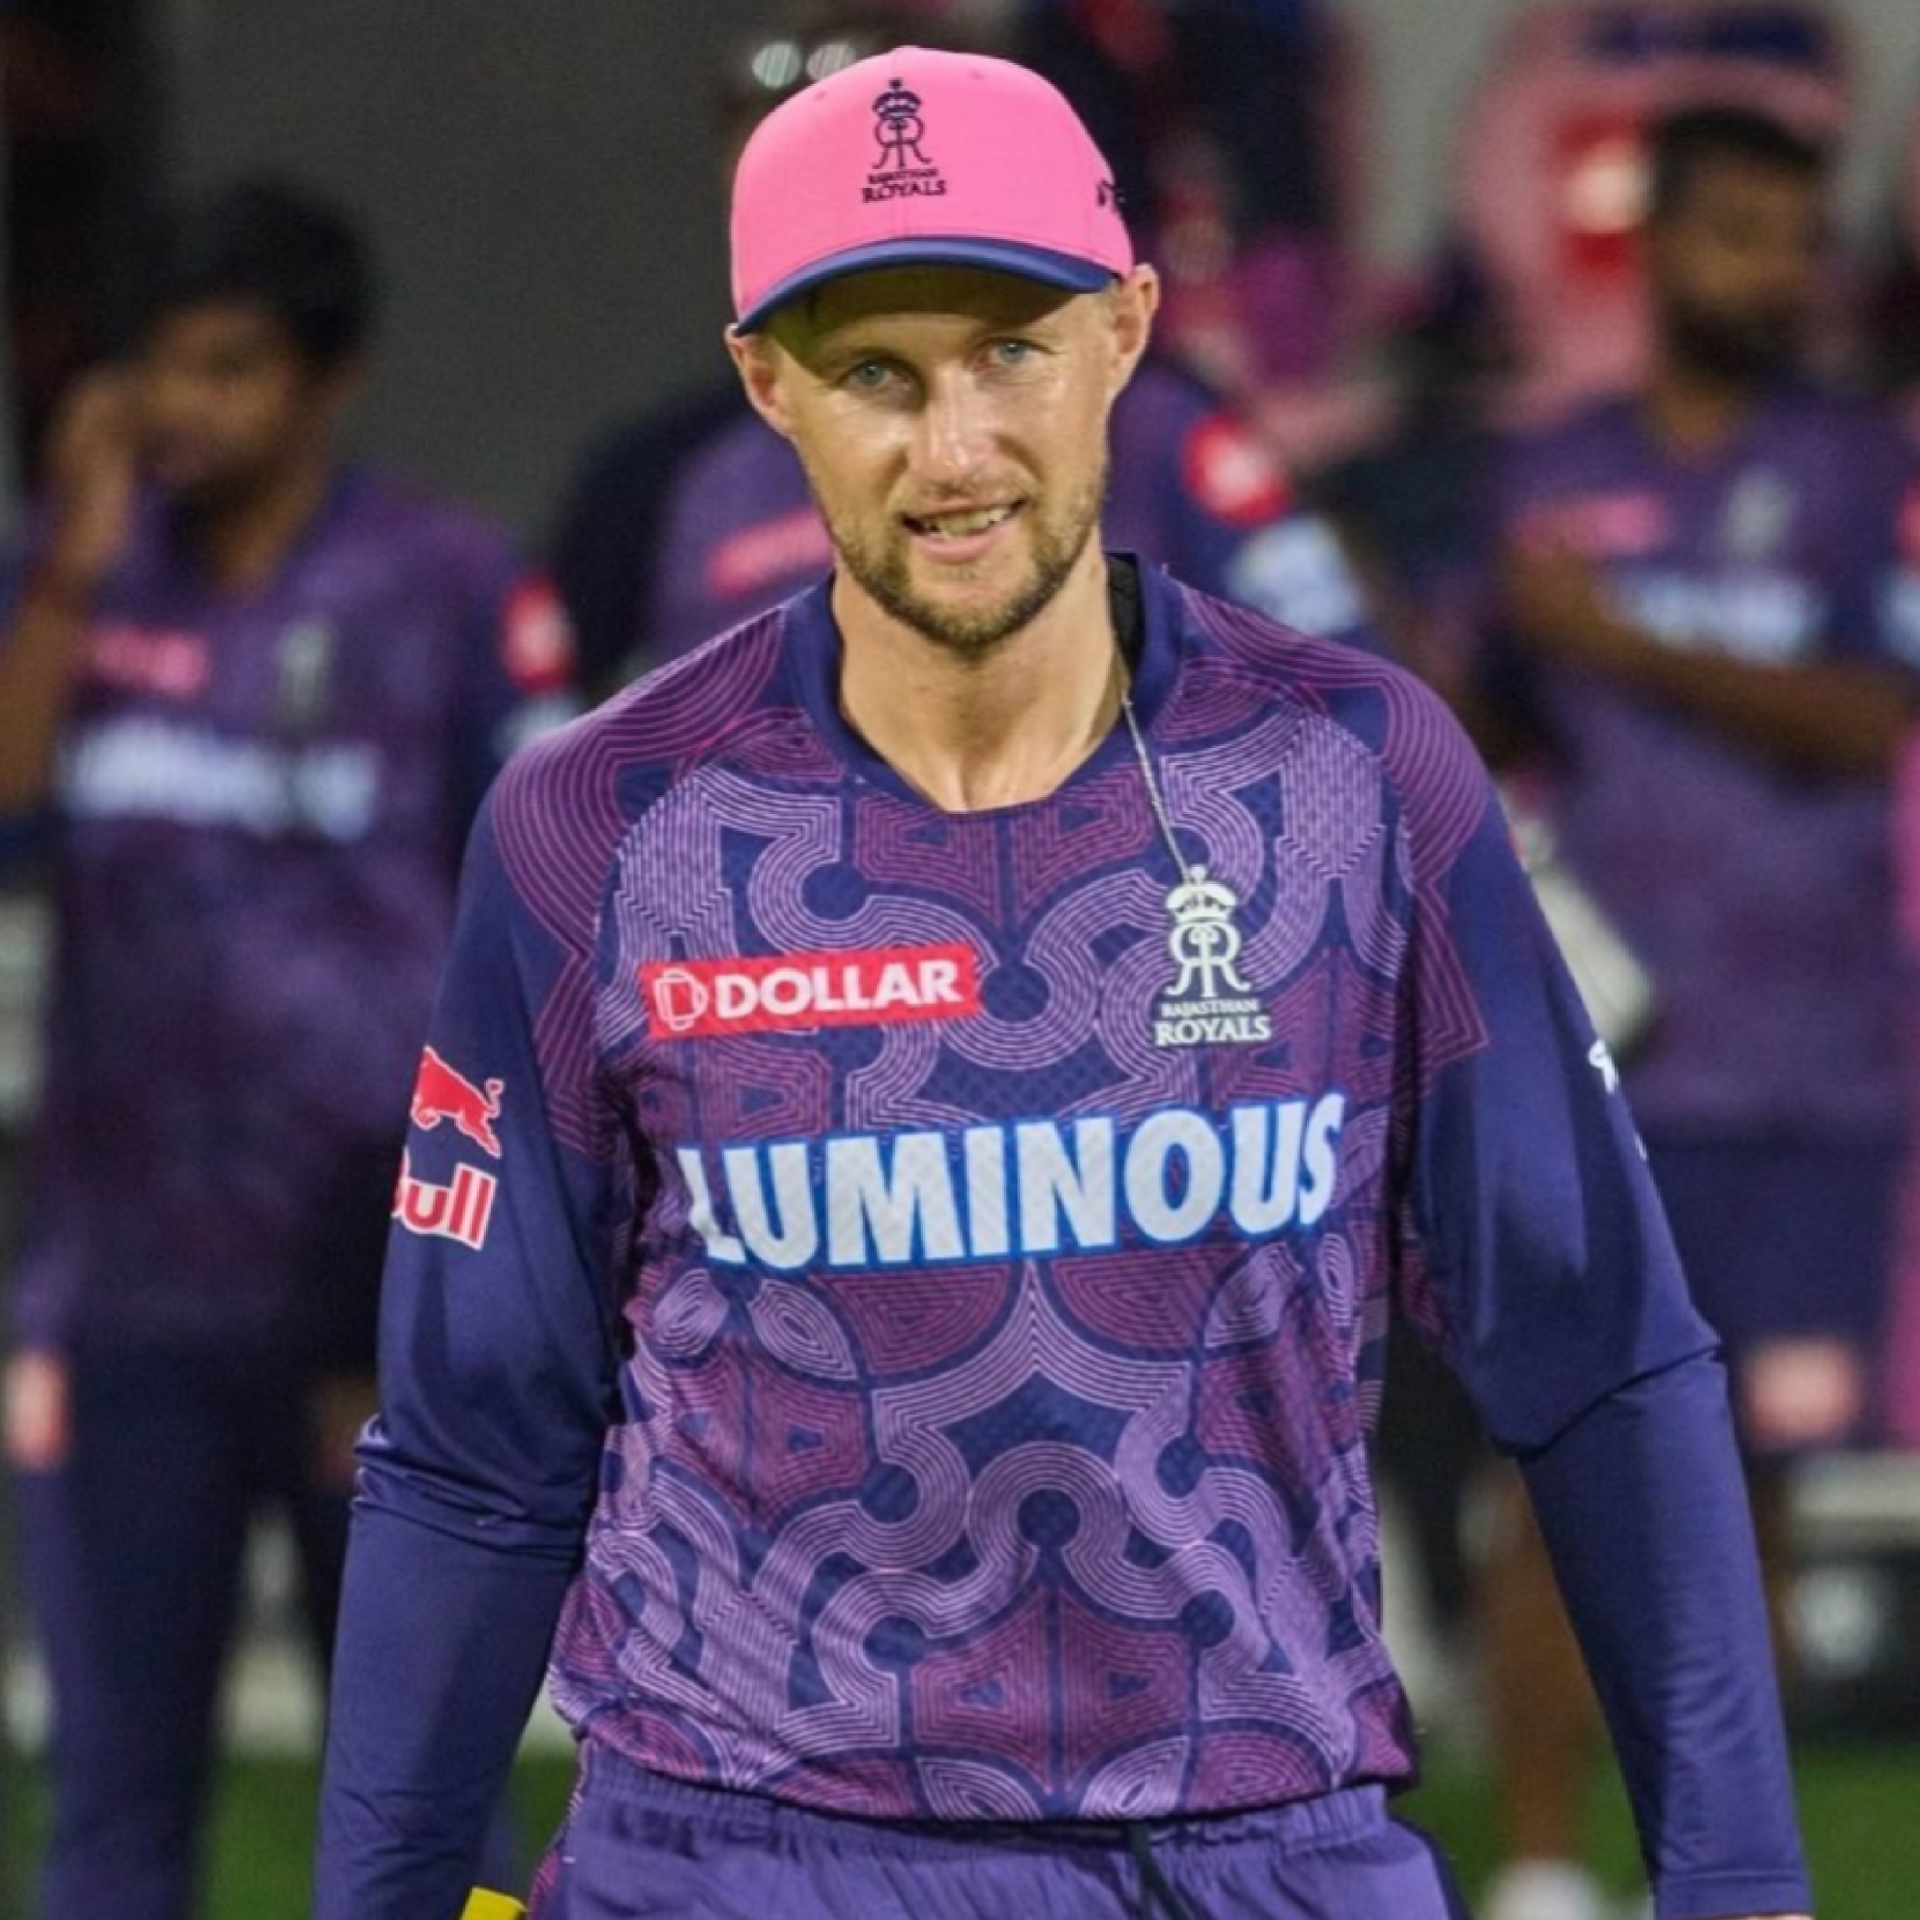 Joe Root IPL debut FALLS FLAT, Ex-England captain plays ‘Test match knock’ as RR star fails to make a mark in crunch RCB clash -Check out